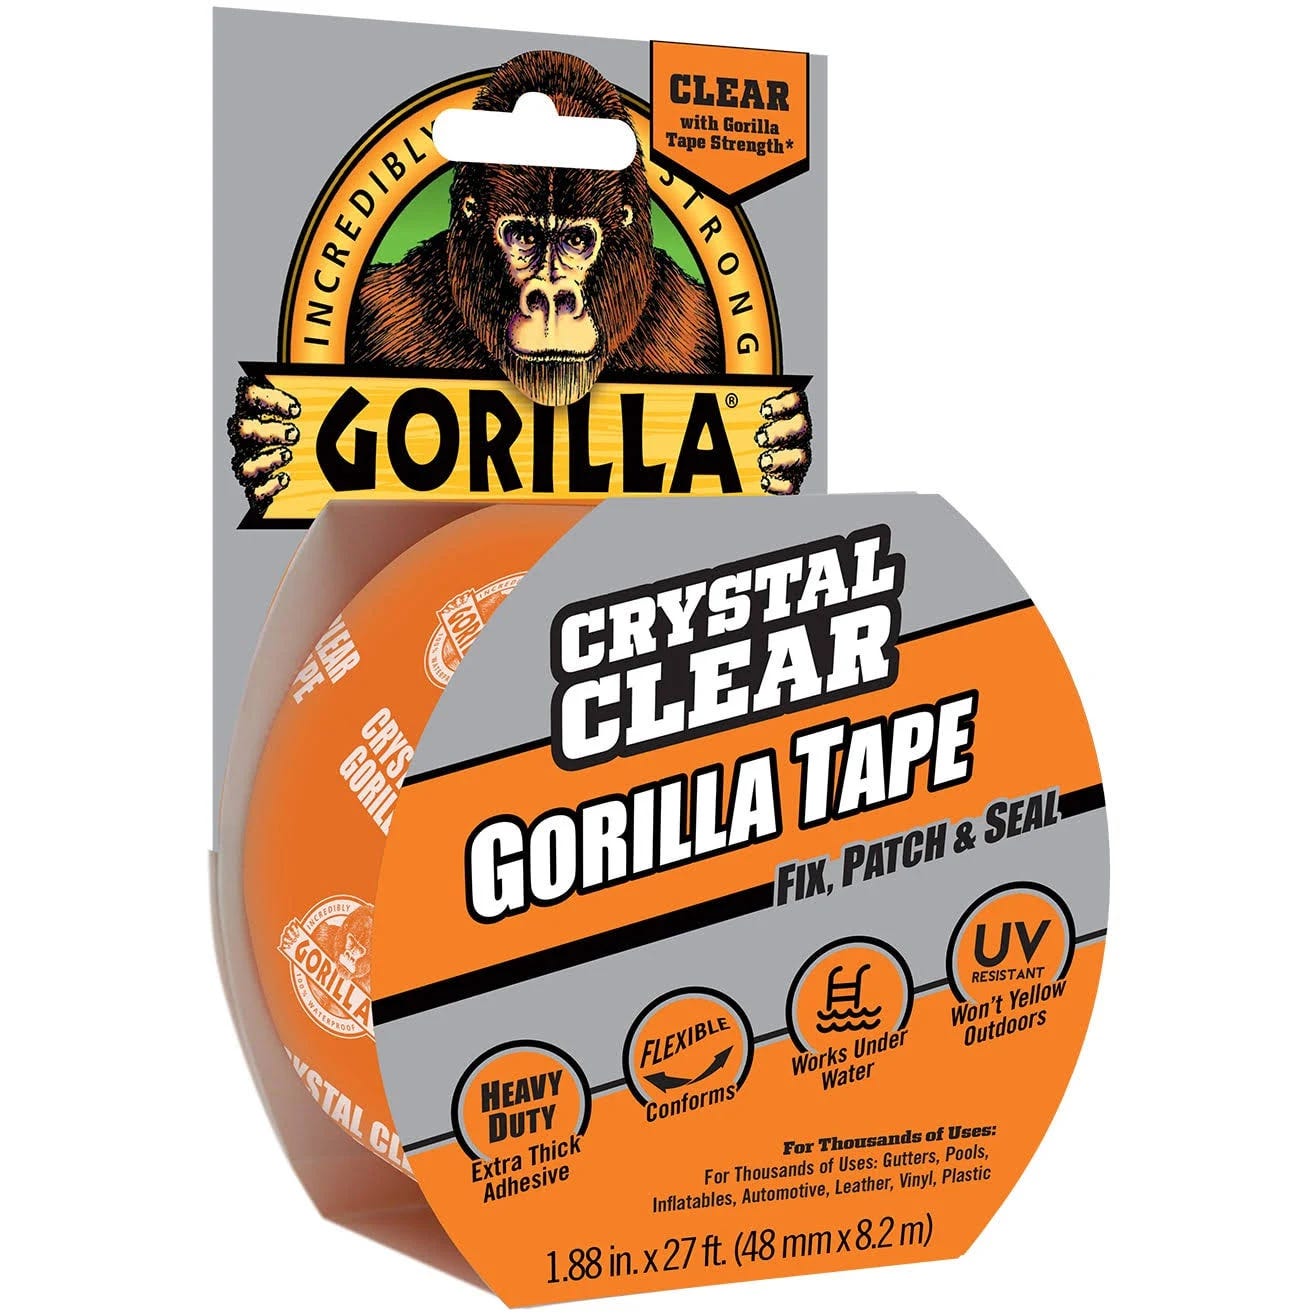 Crystal Clear Gorilla Waterproof Duct Tape for Durable Repairs | Image